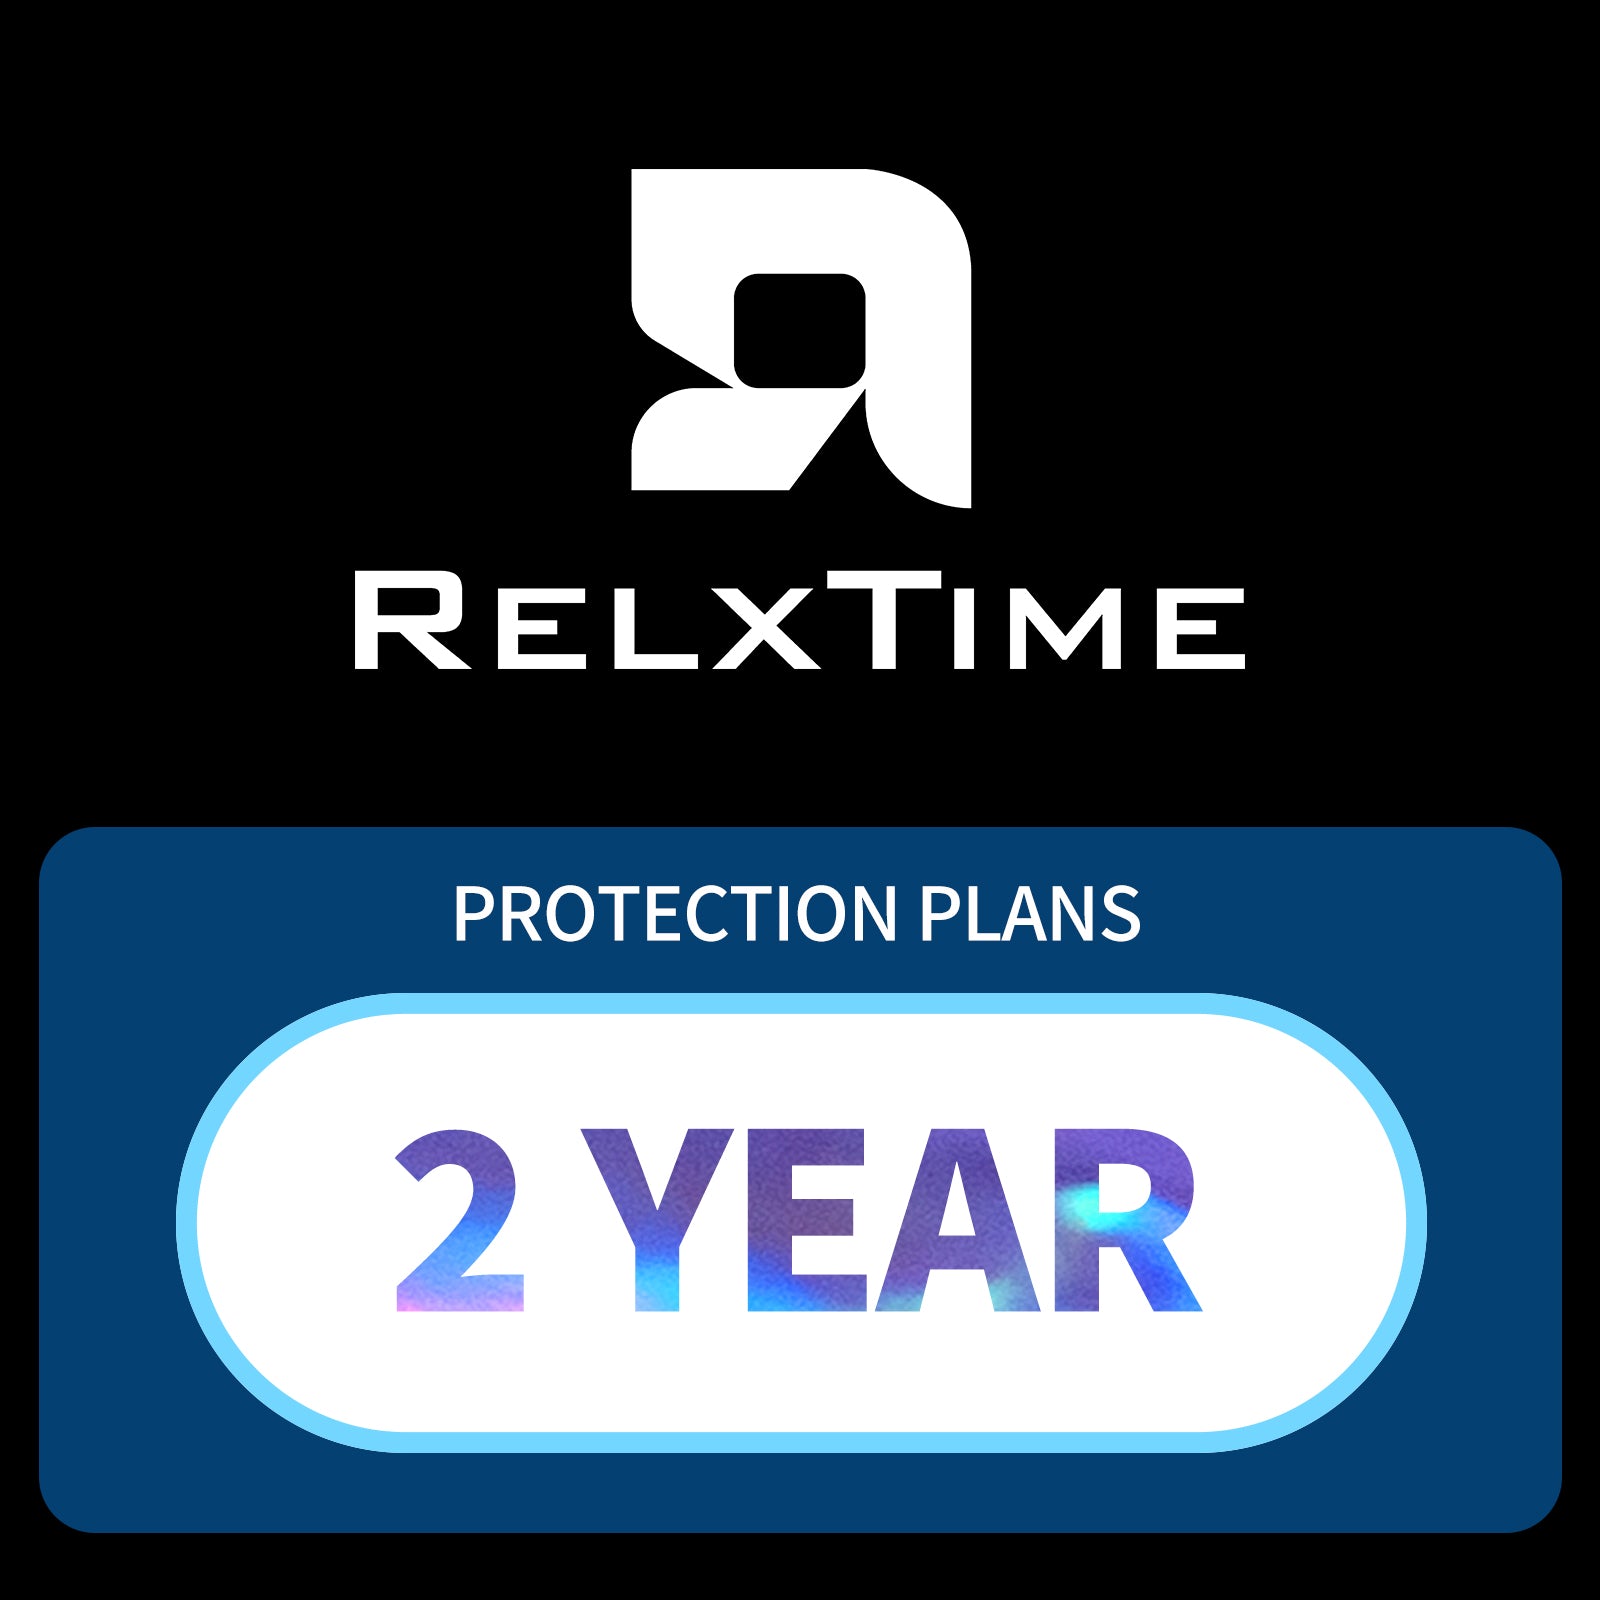 2 YEAR PROTECTION PLANS